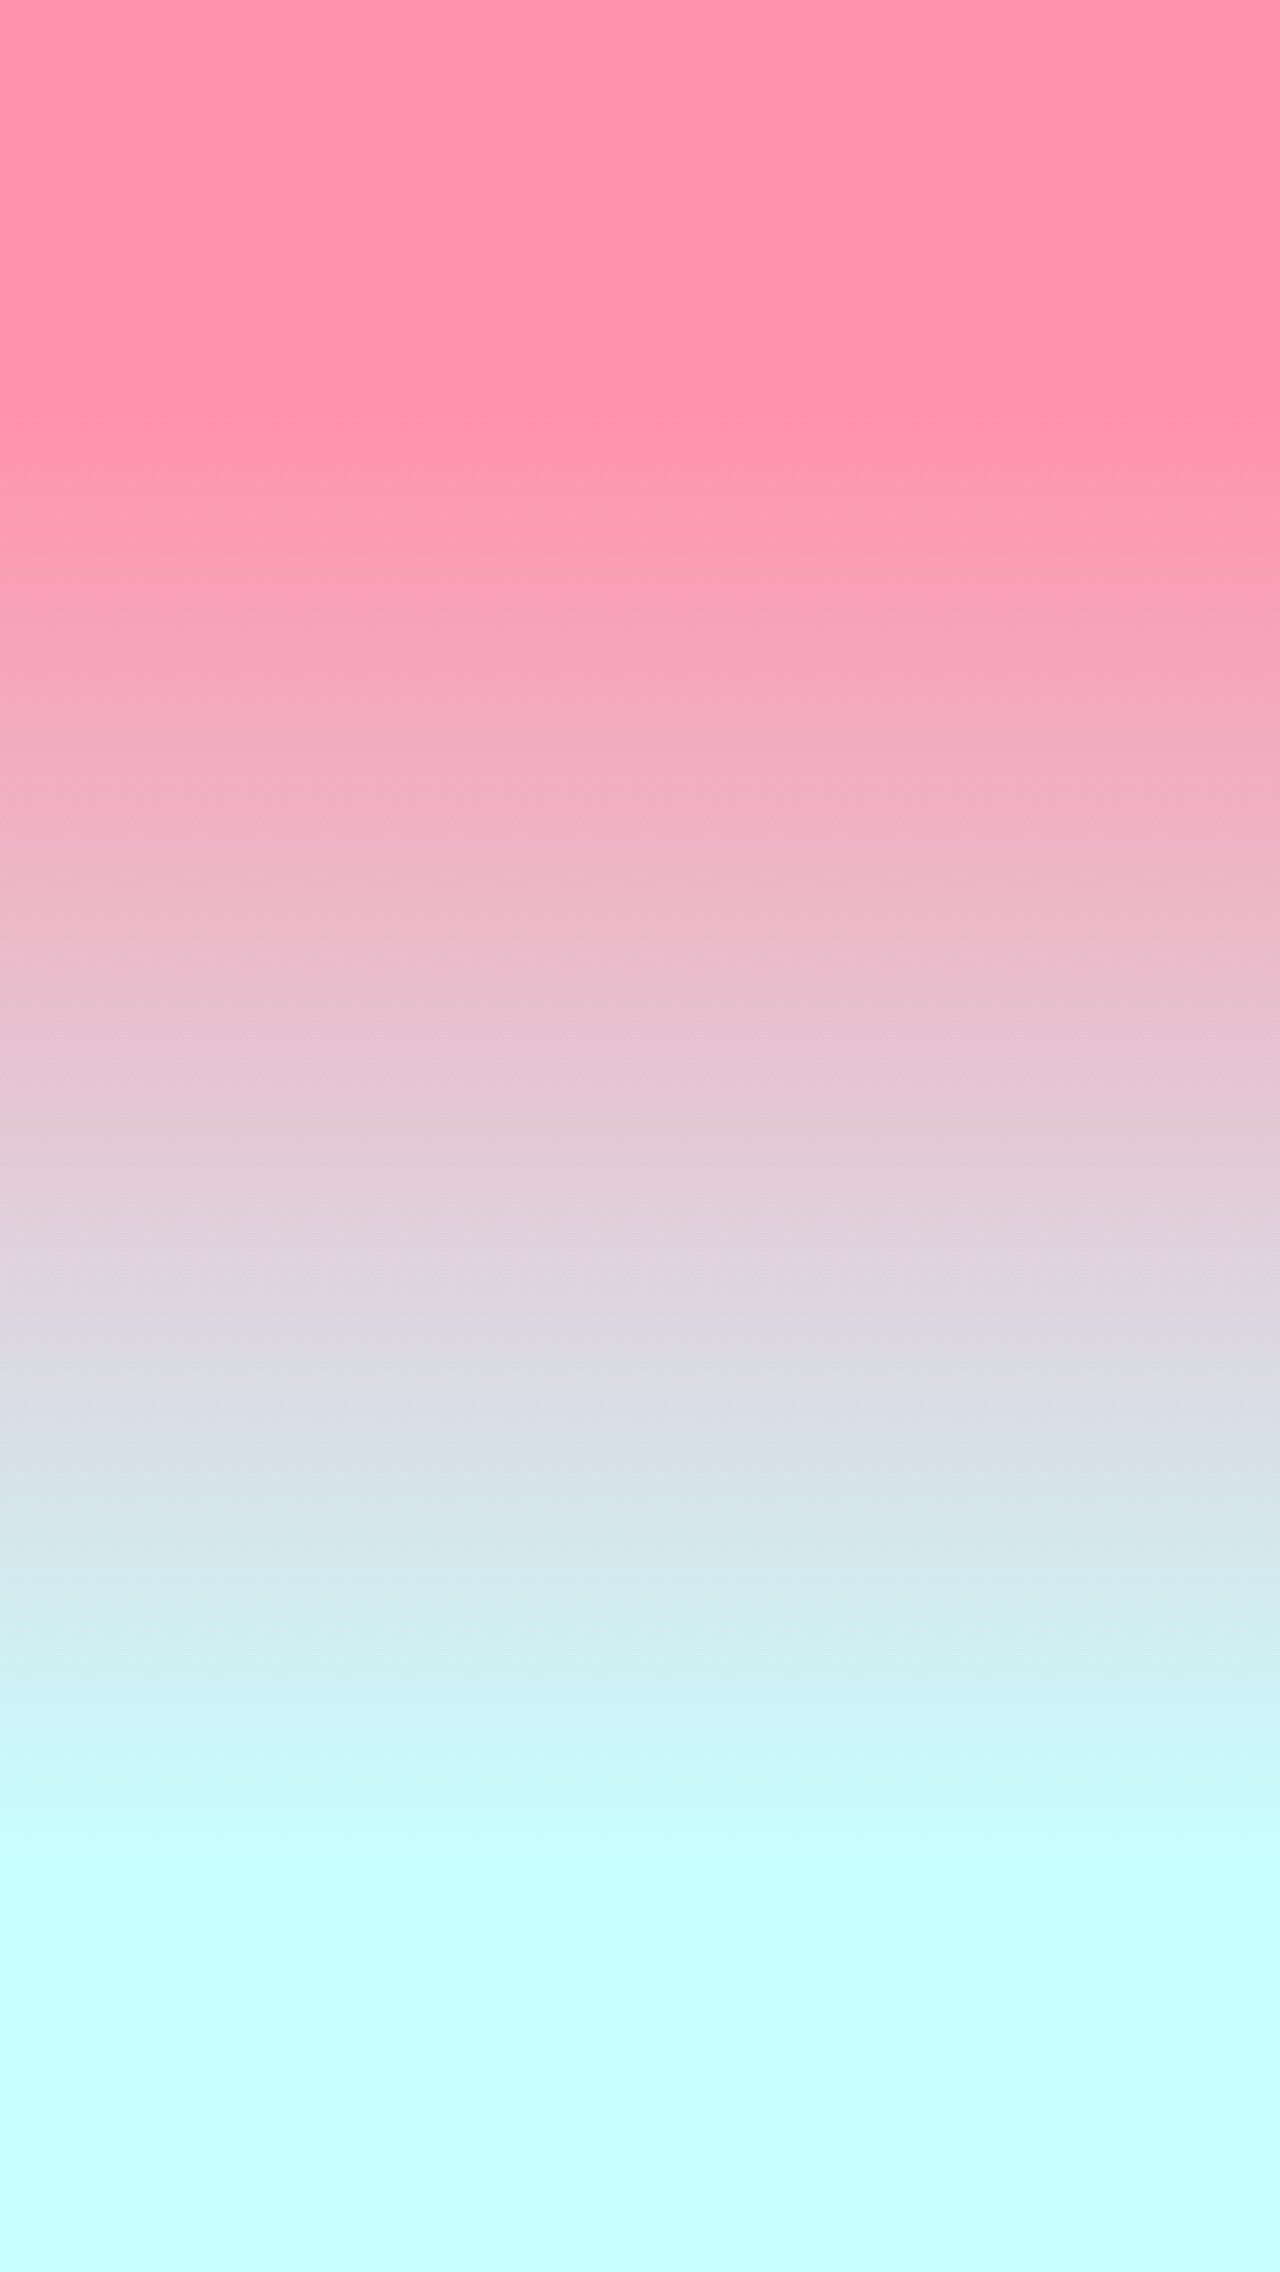 Blue and Pink Ombre Wallpaper (60+ images)